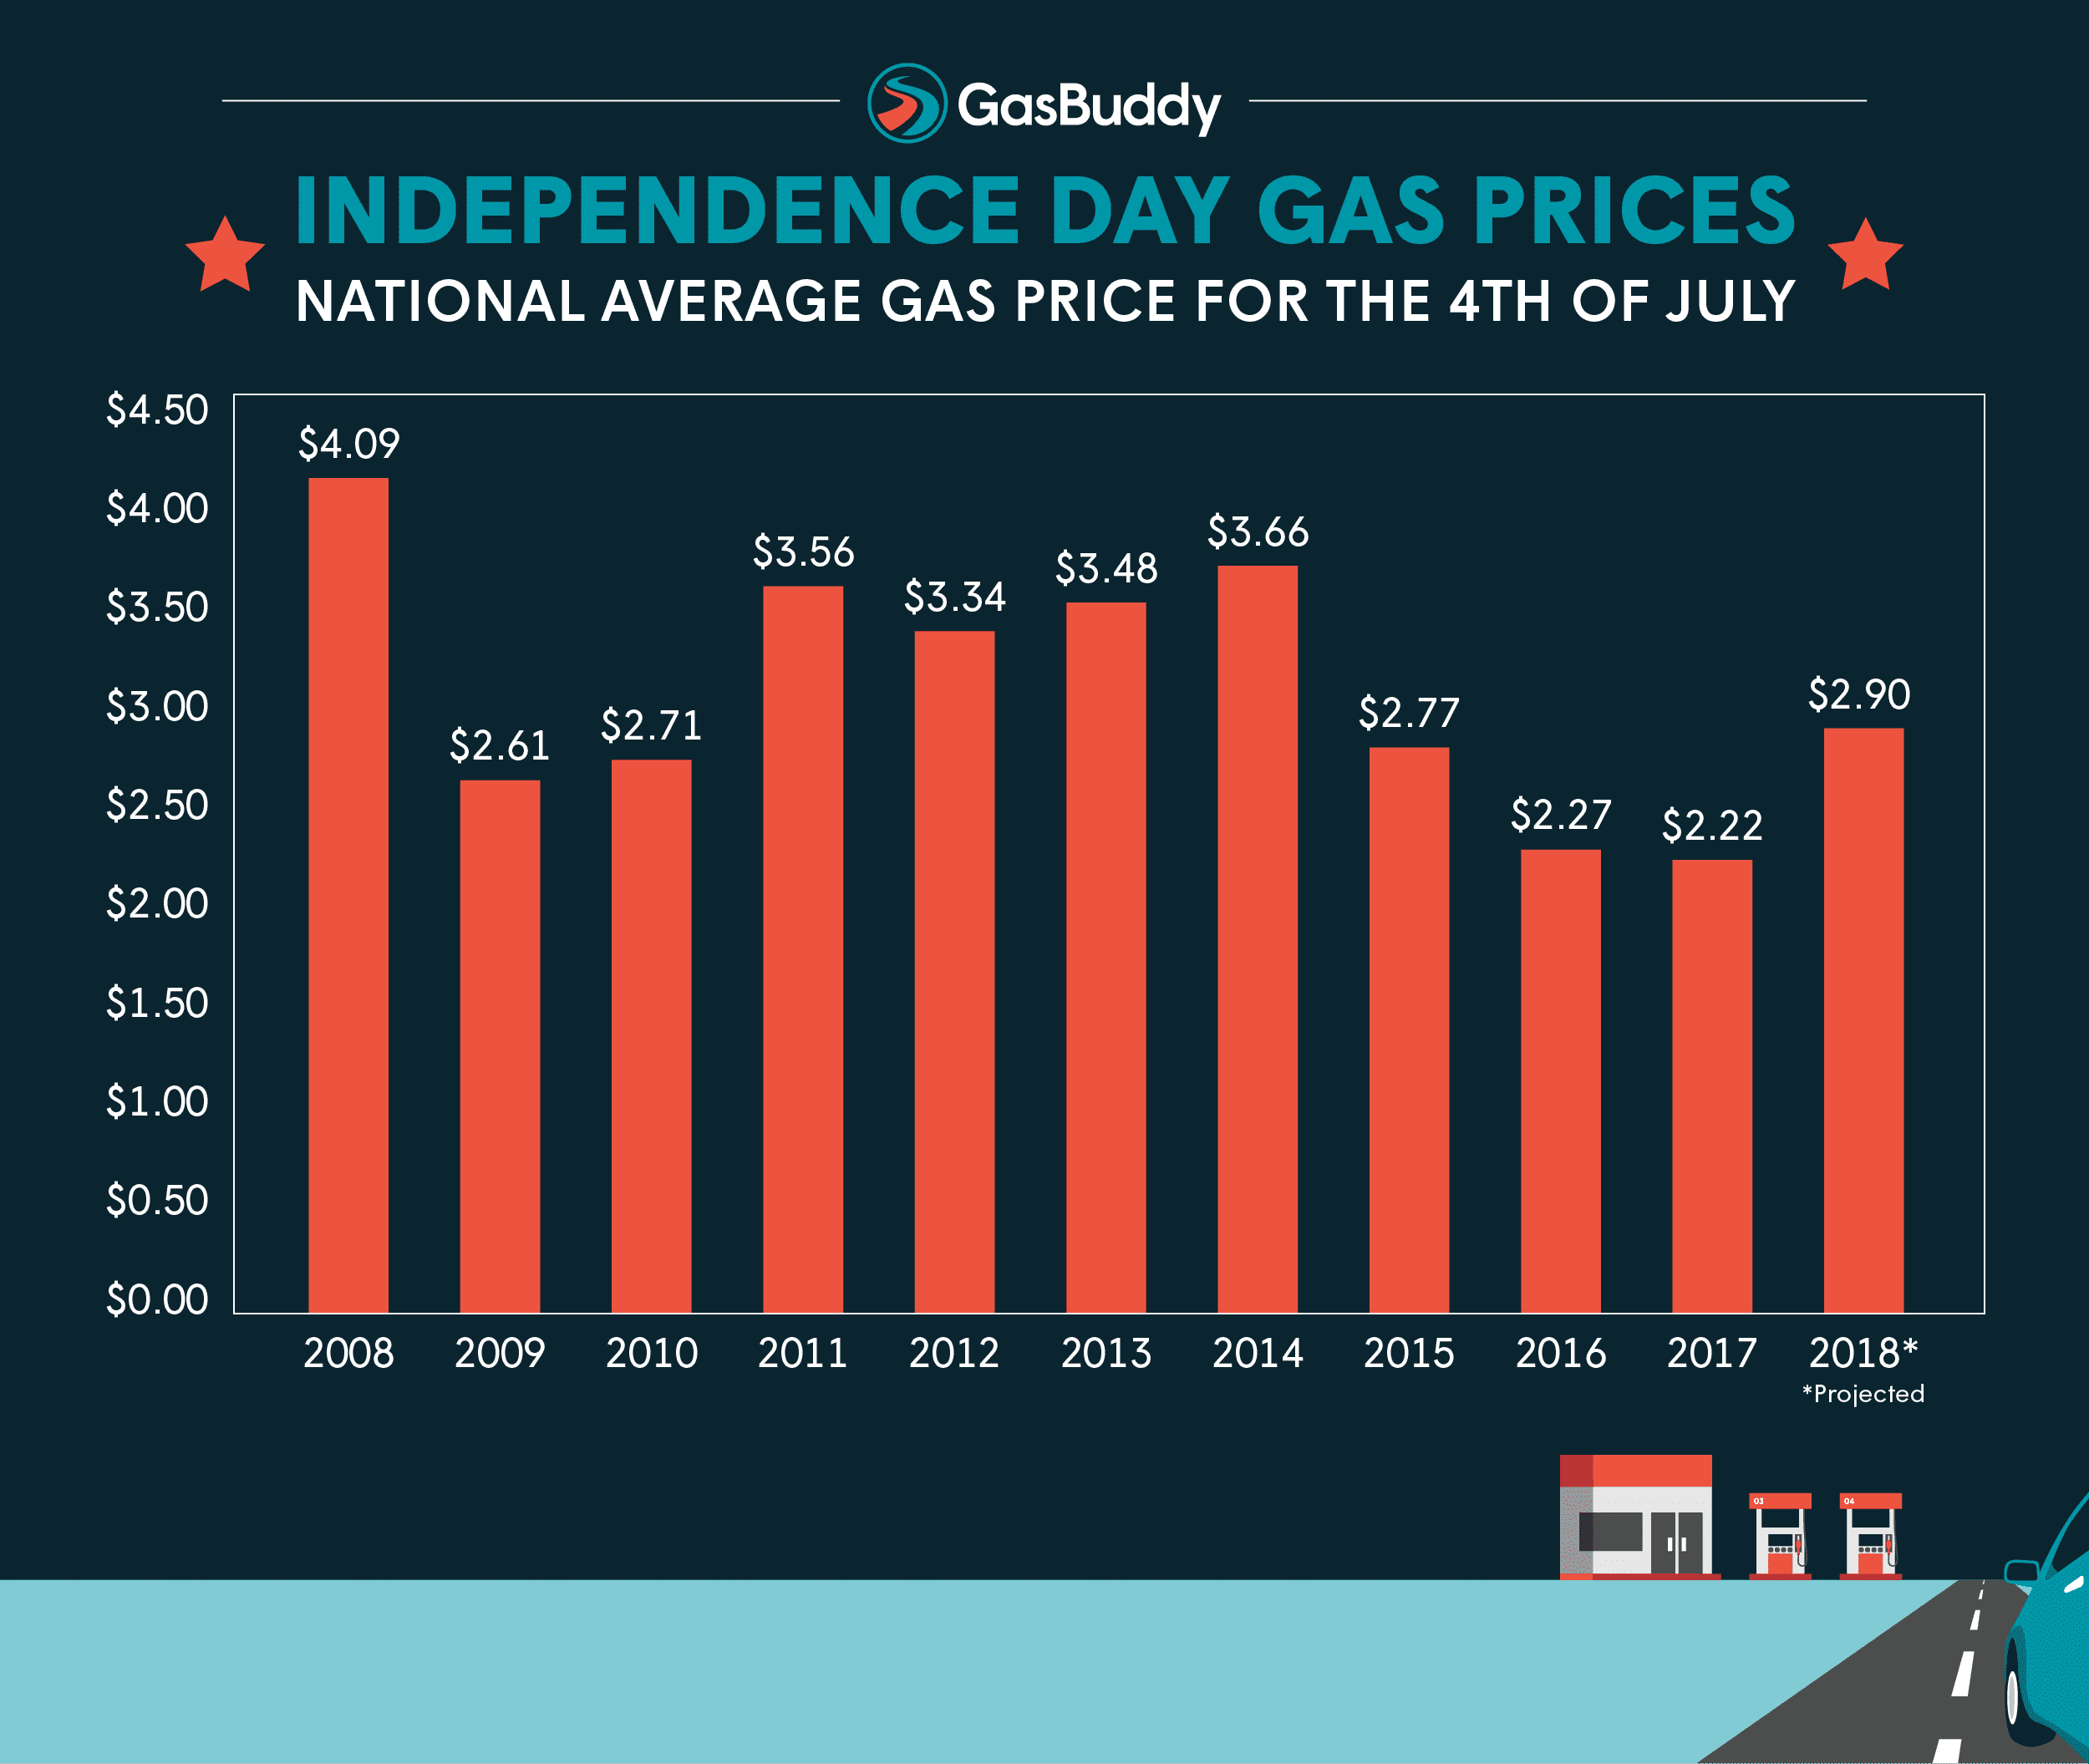 July 4 Gas Prices Highest in Four Years, Costing Drivers $1B More Than 2017